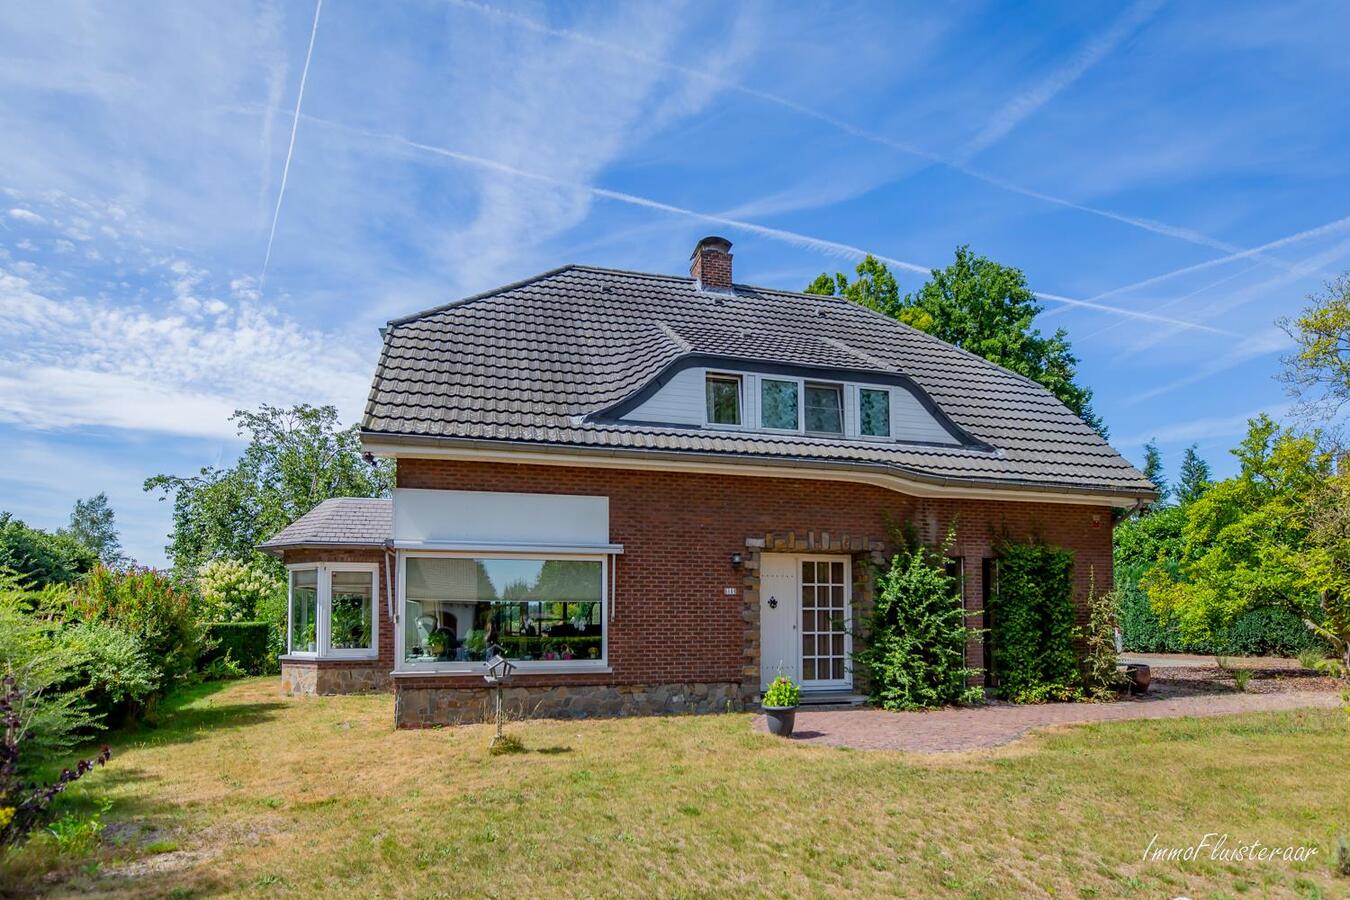 Property for sale |  with option - with restrictions in Poppel